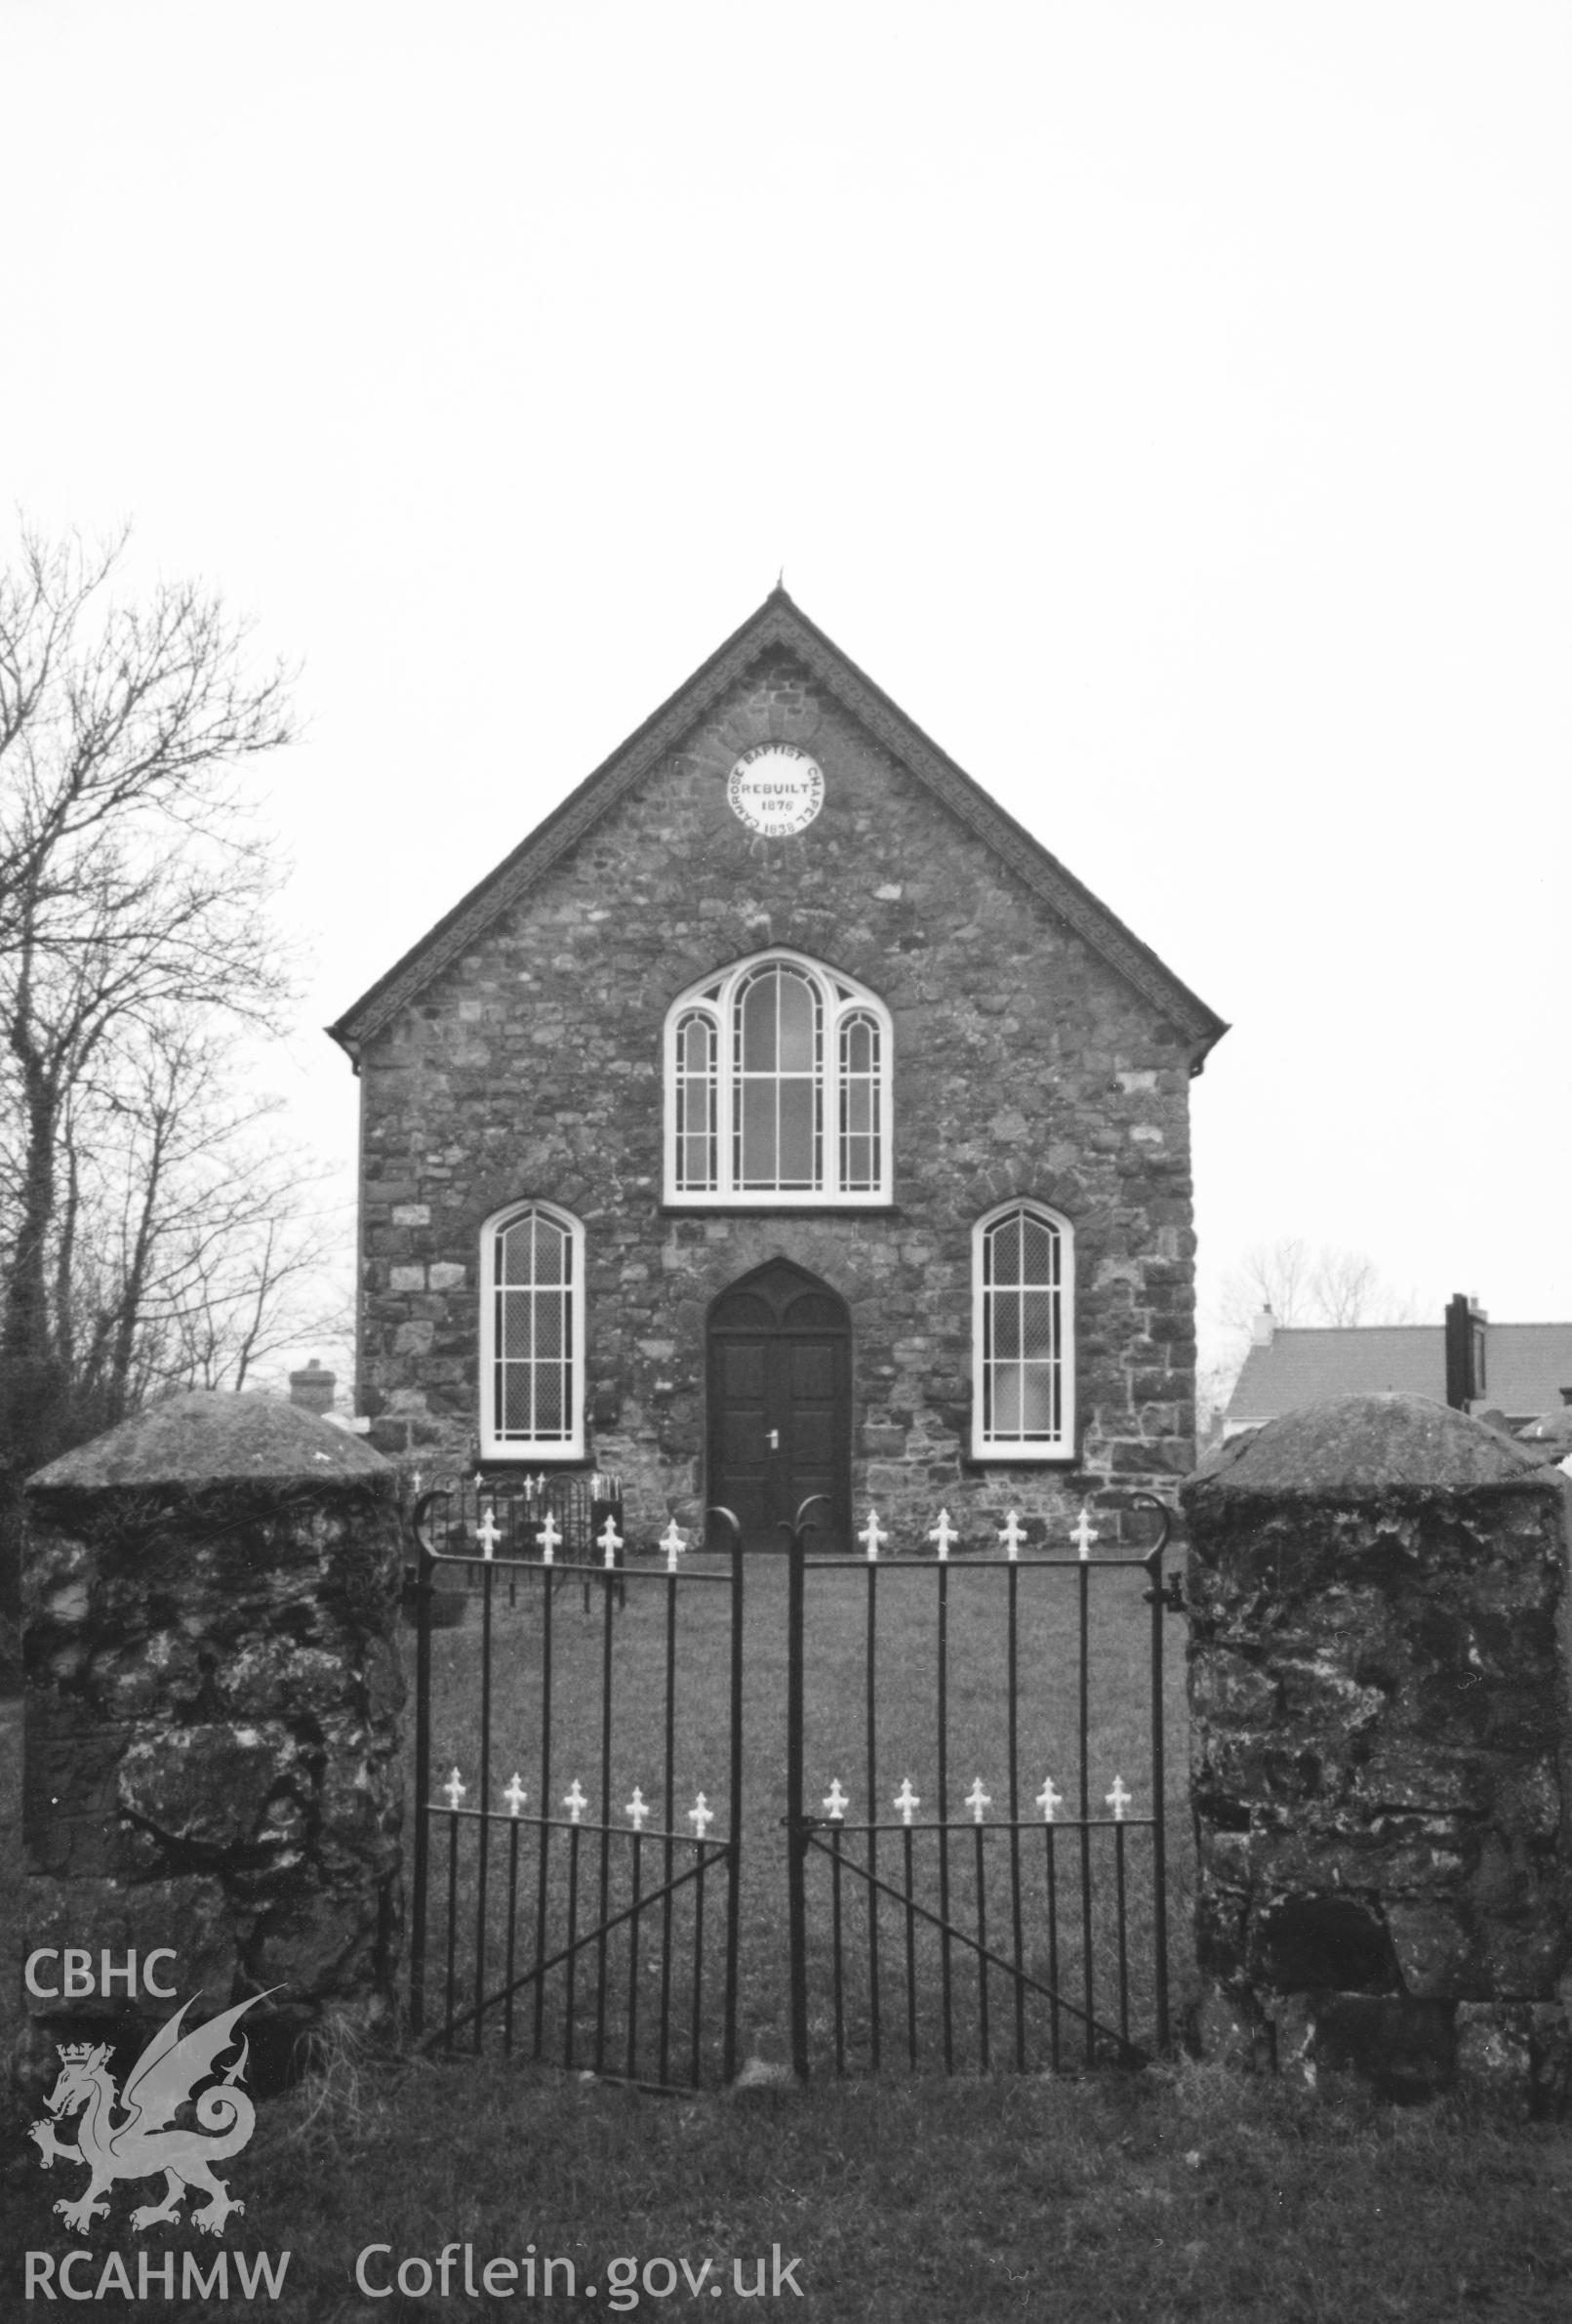 Digital copy of a black and white photograph showing an exterior view of Lebanon Baptist Chapel, Camrose, taken by Robert Scourfield, 1996.